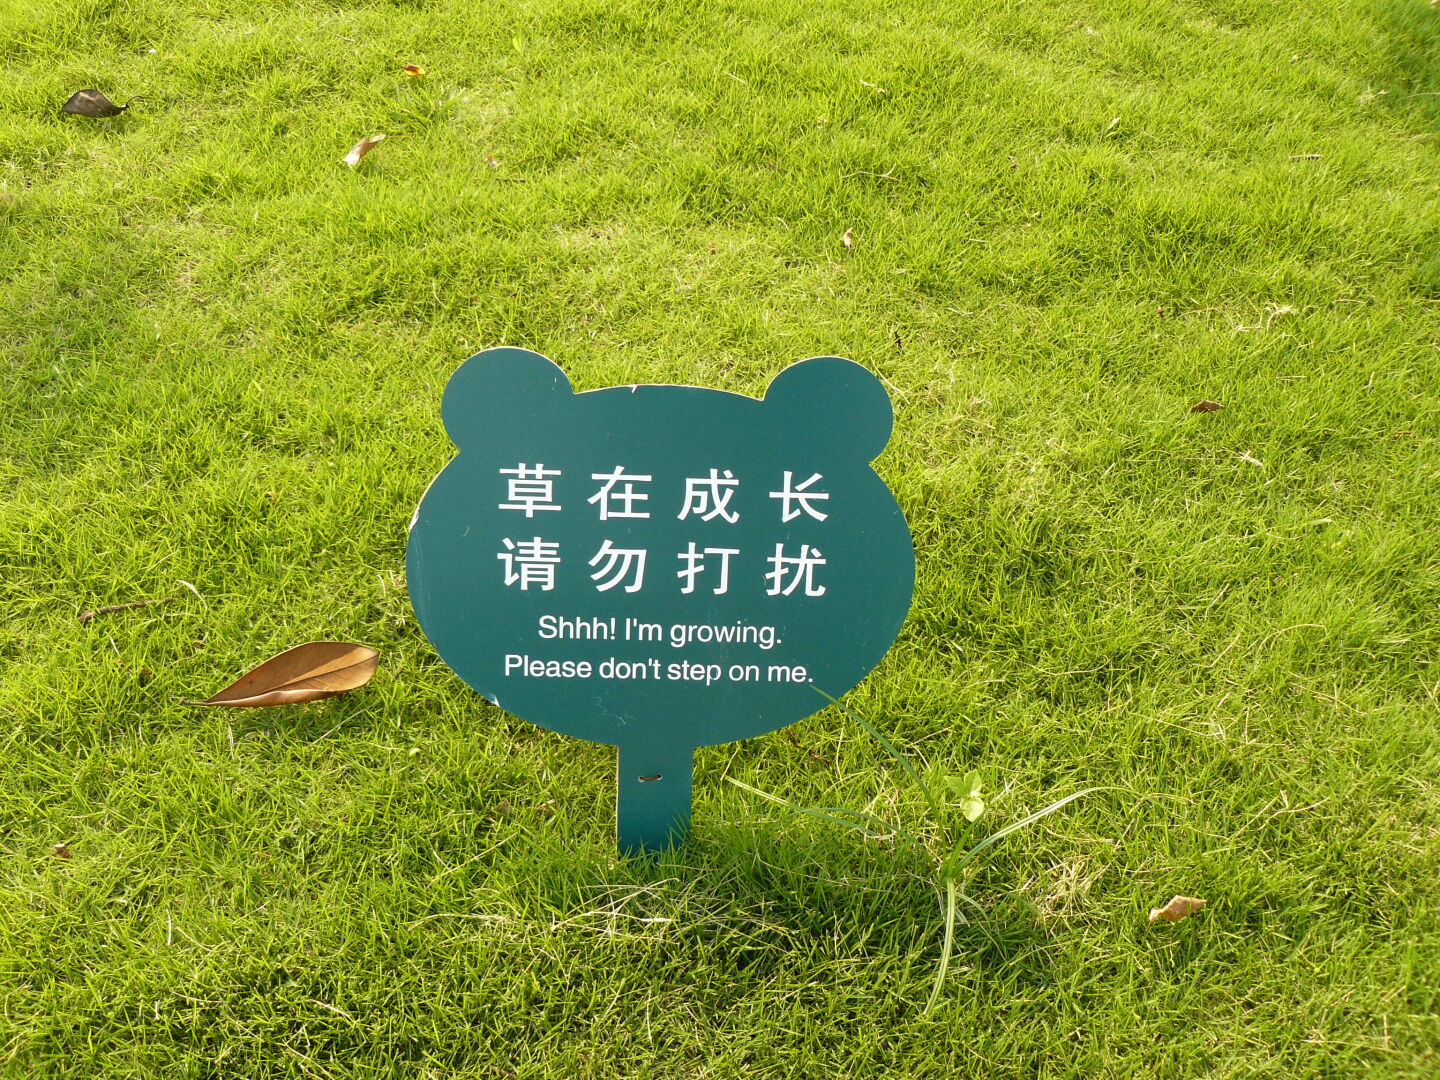 A very polite way to say 'keep off the grass'.